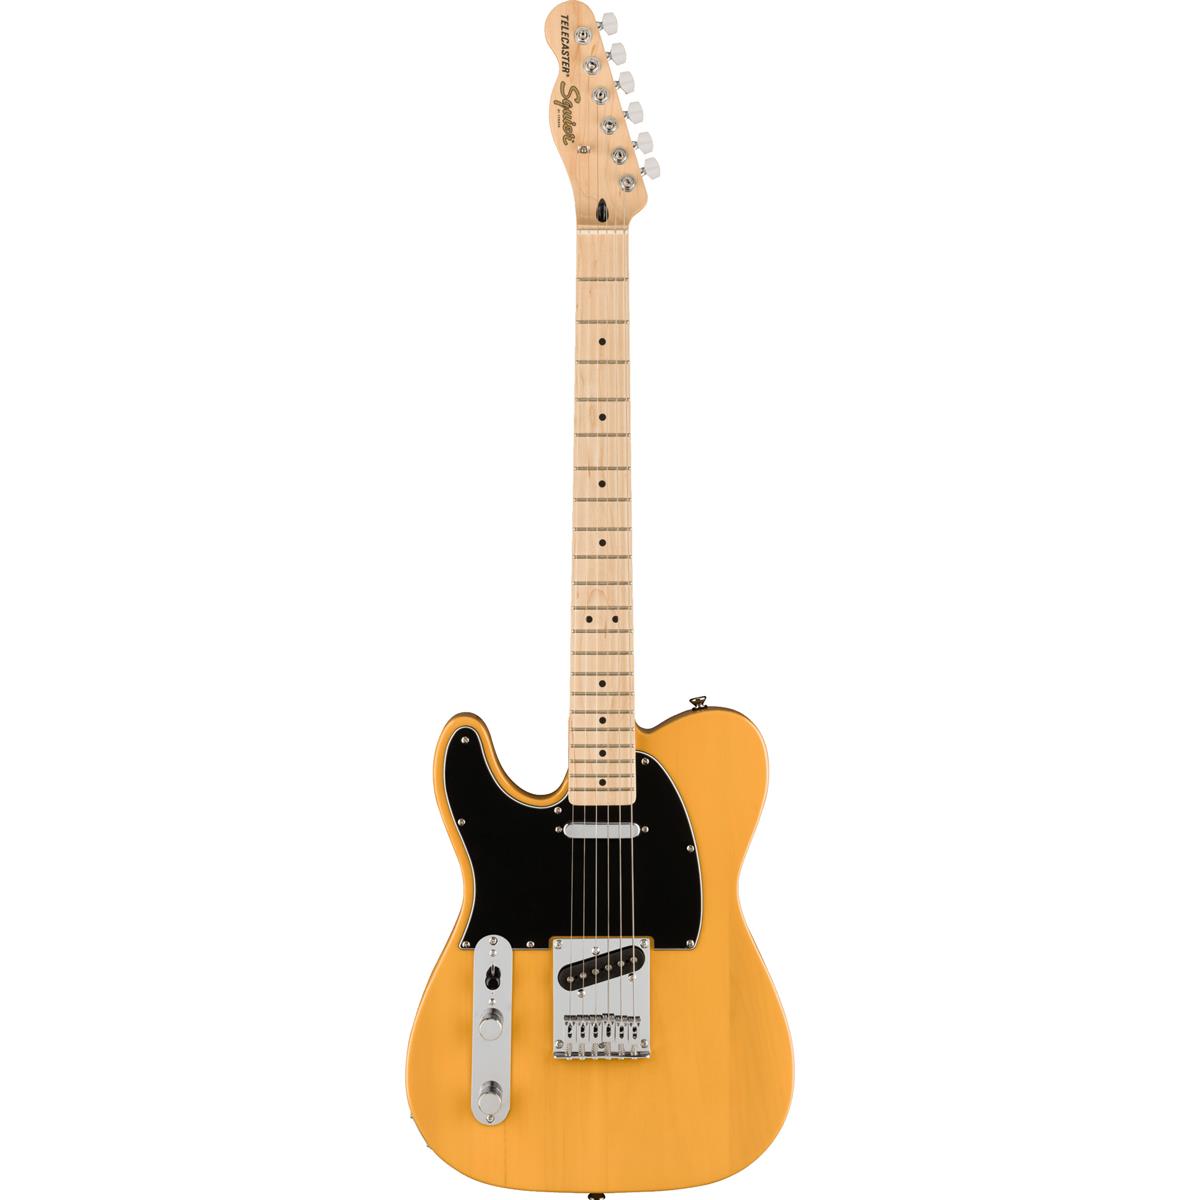 Image of Squier Affinity Series Telecaster Left-Handed Guitar